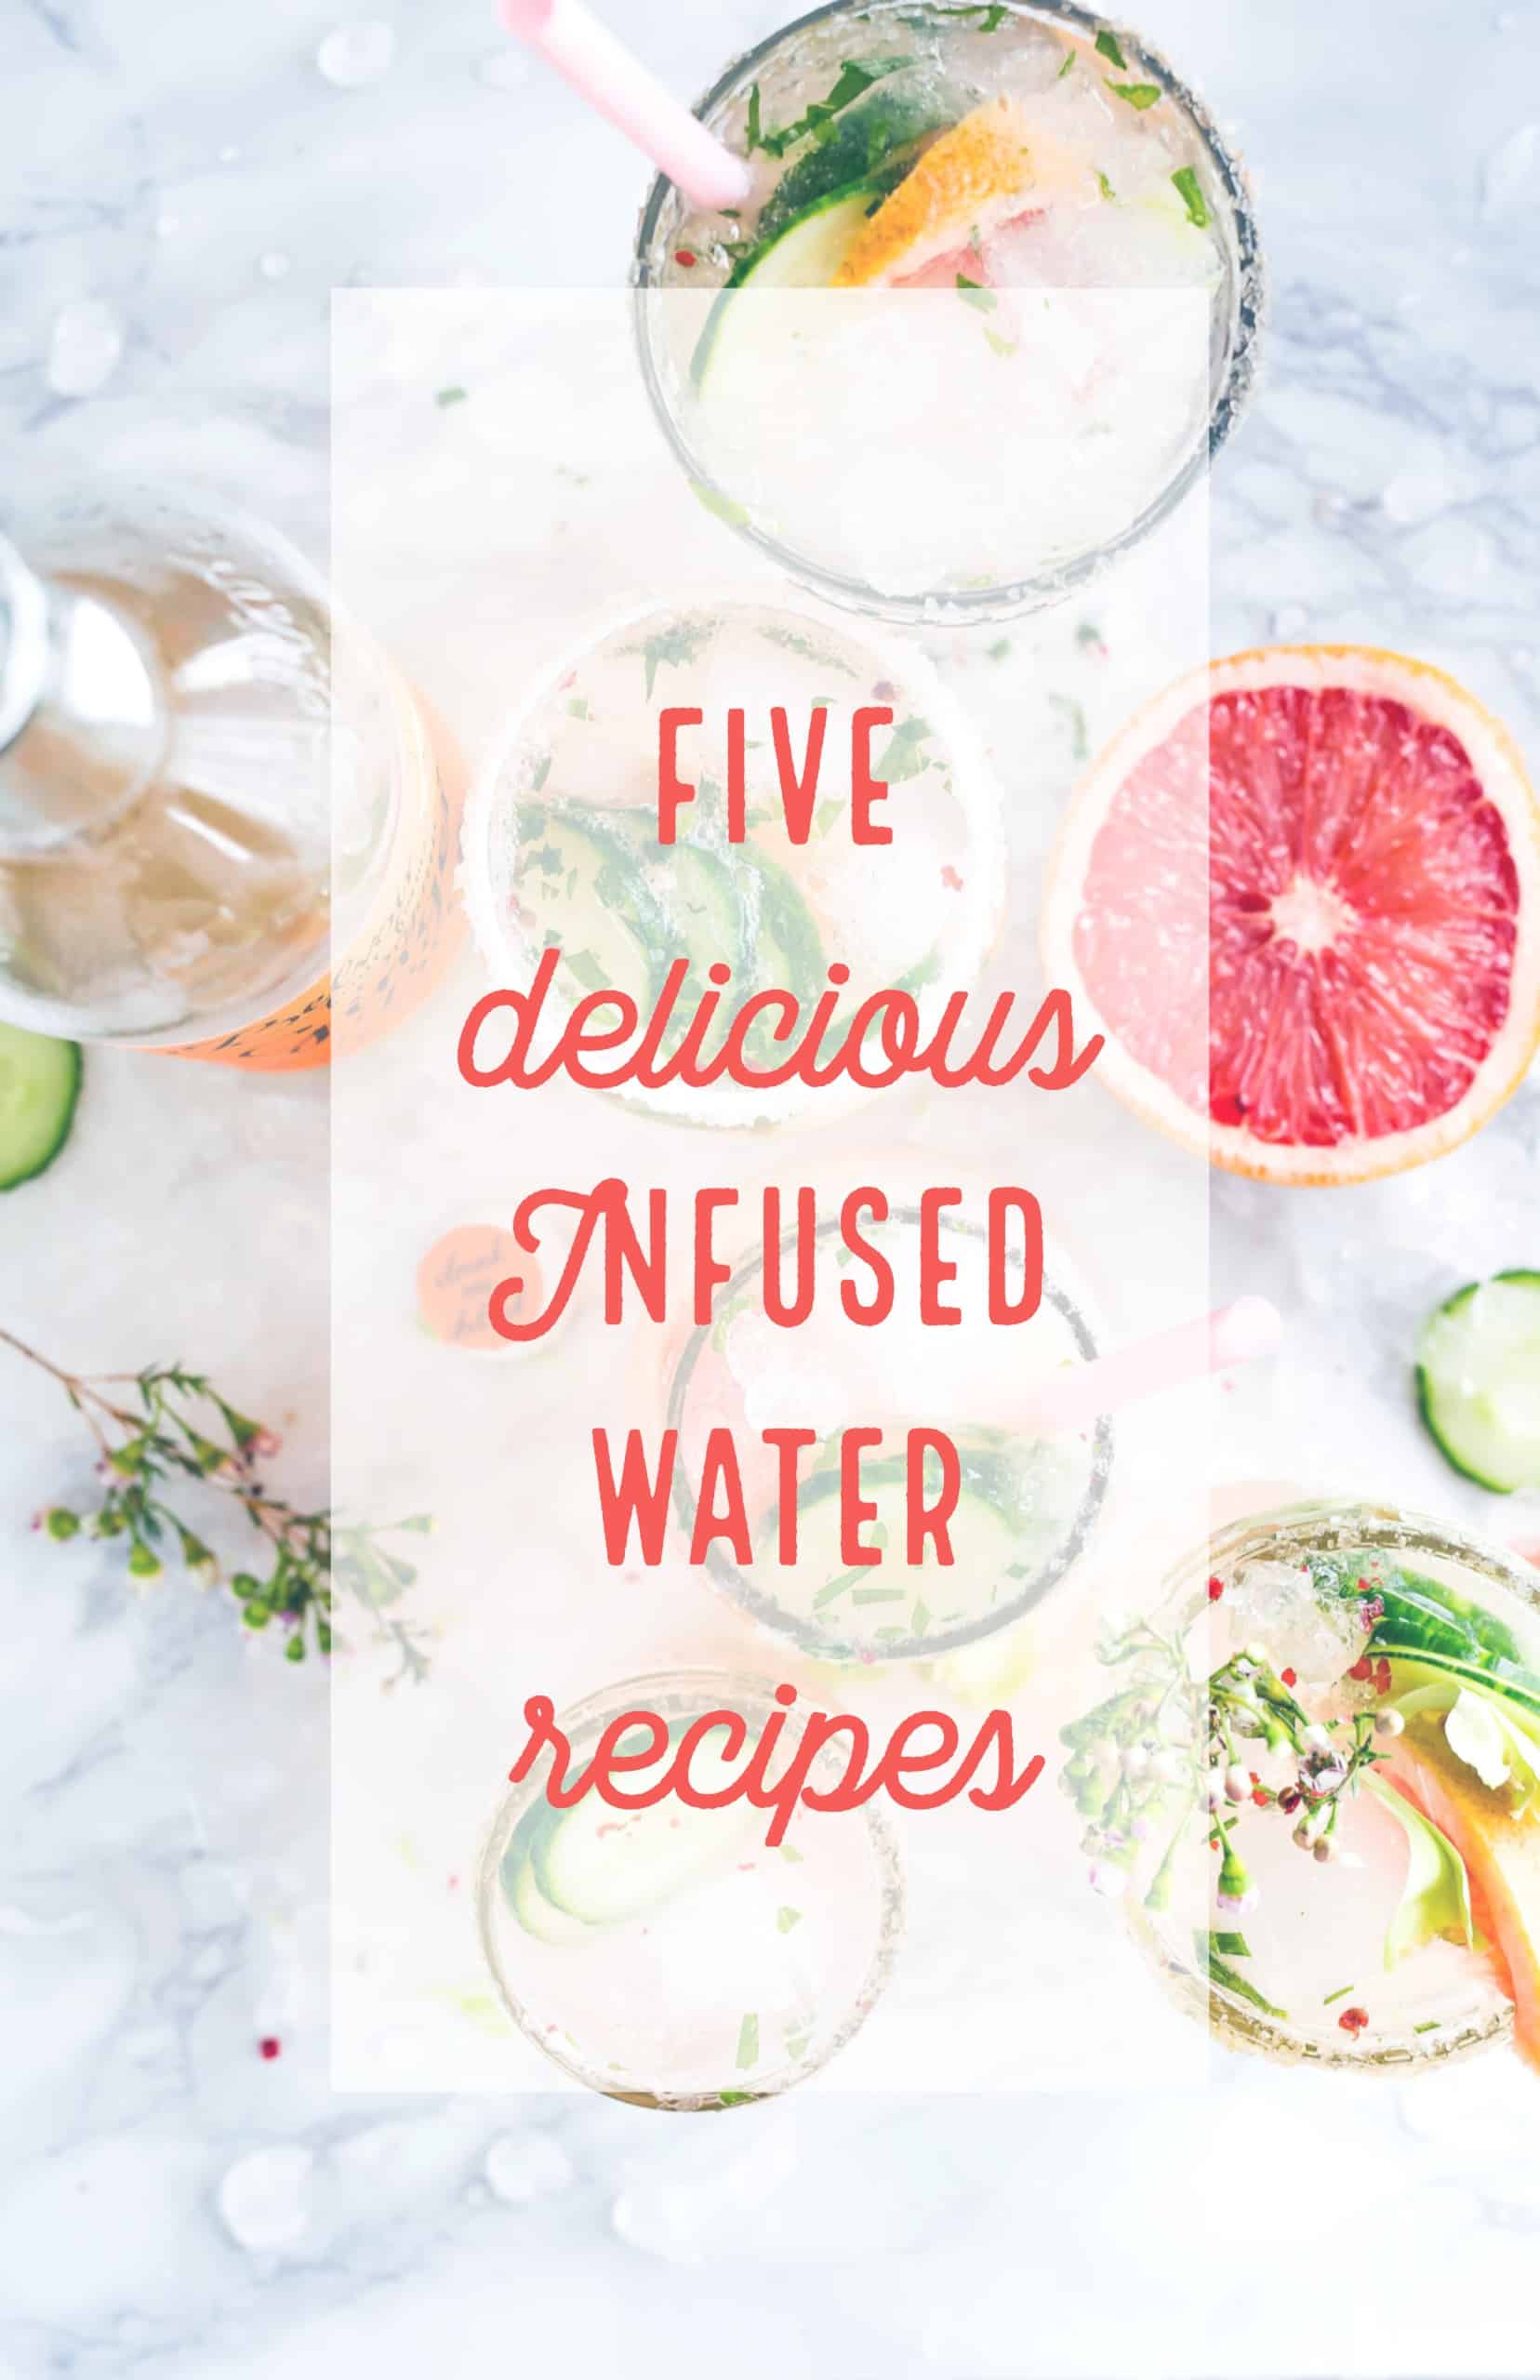 Infused Water Recipes